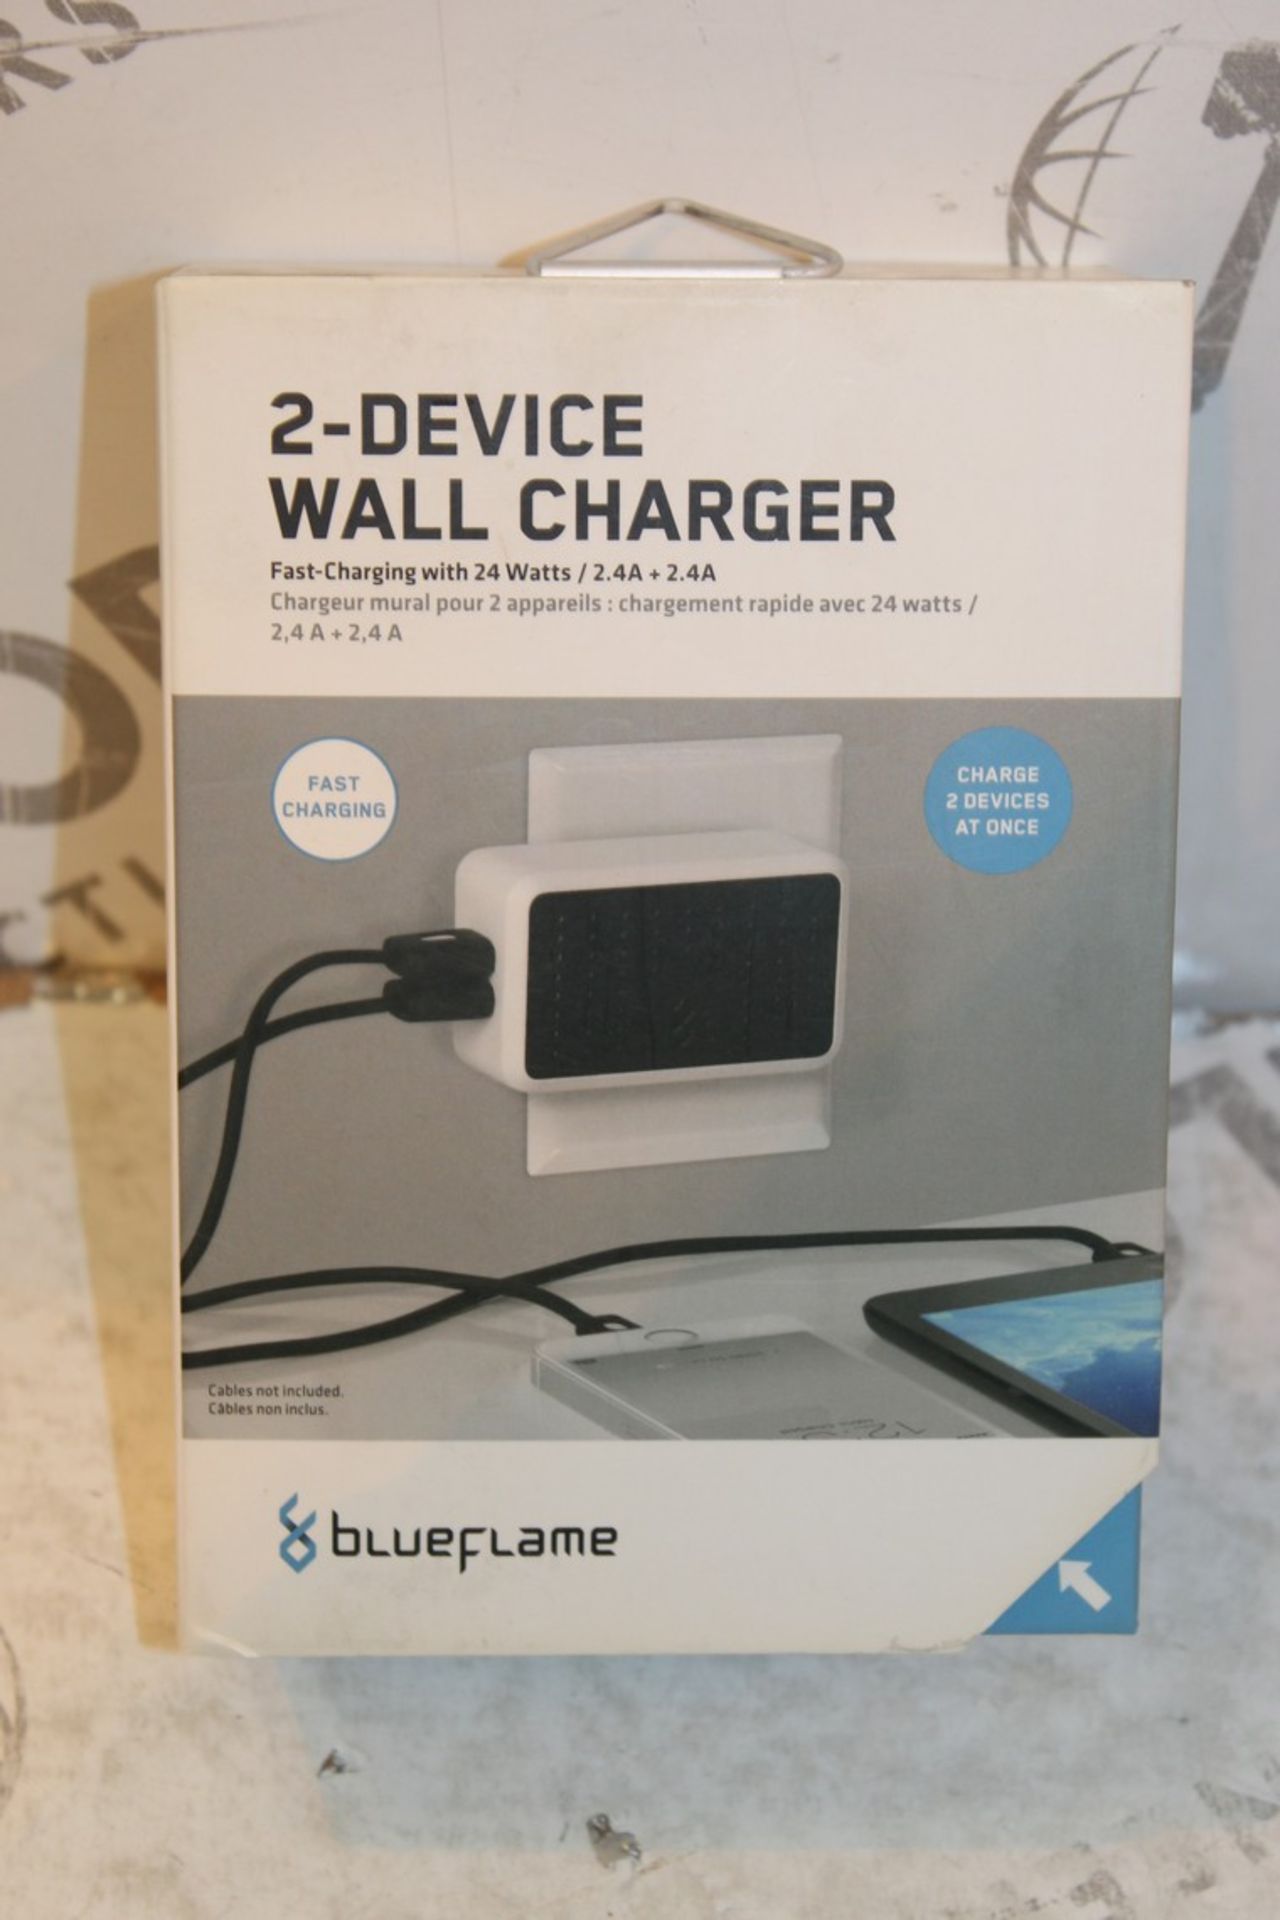 Boxed Brand New Blue Flame 2 Device Wall Charger RRP £35 (Appraisals Available Upon Request) (